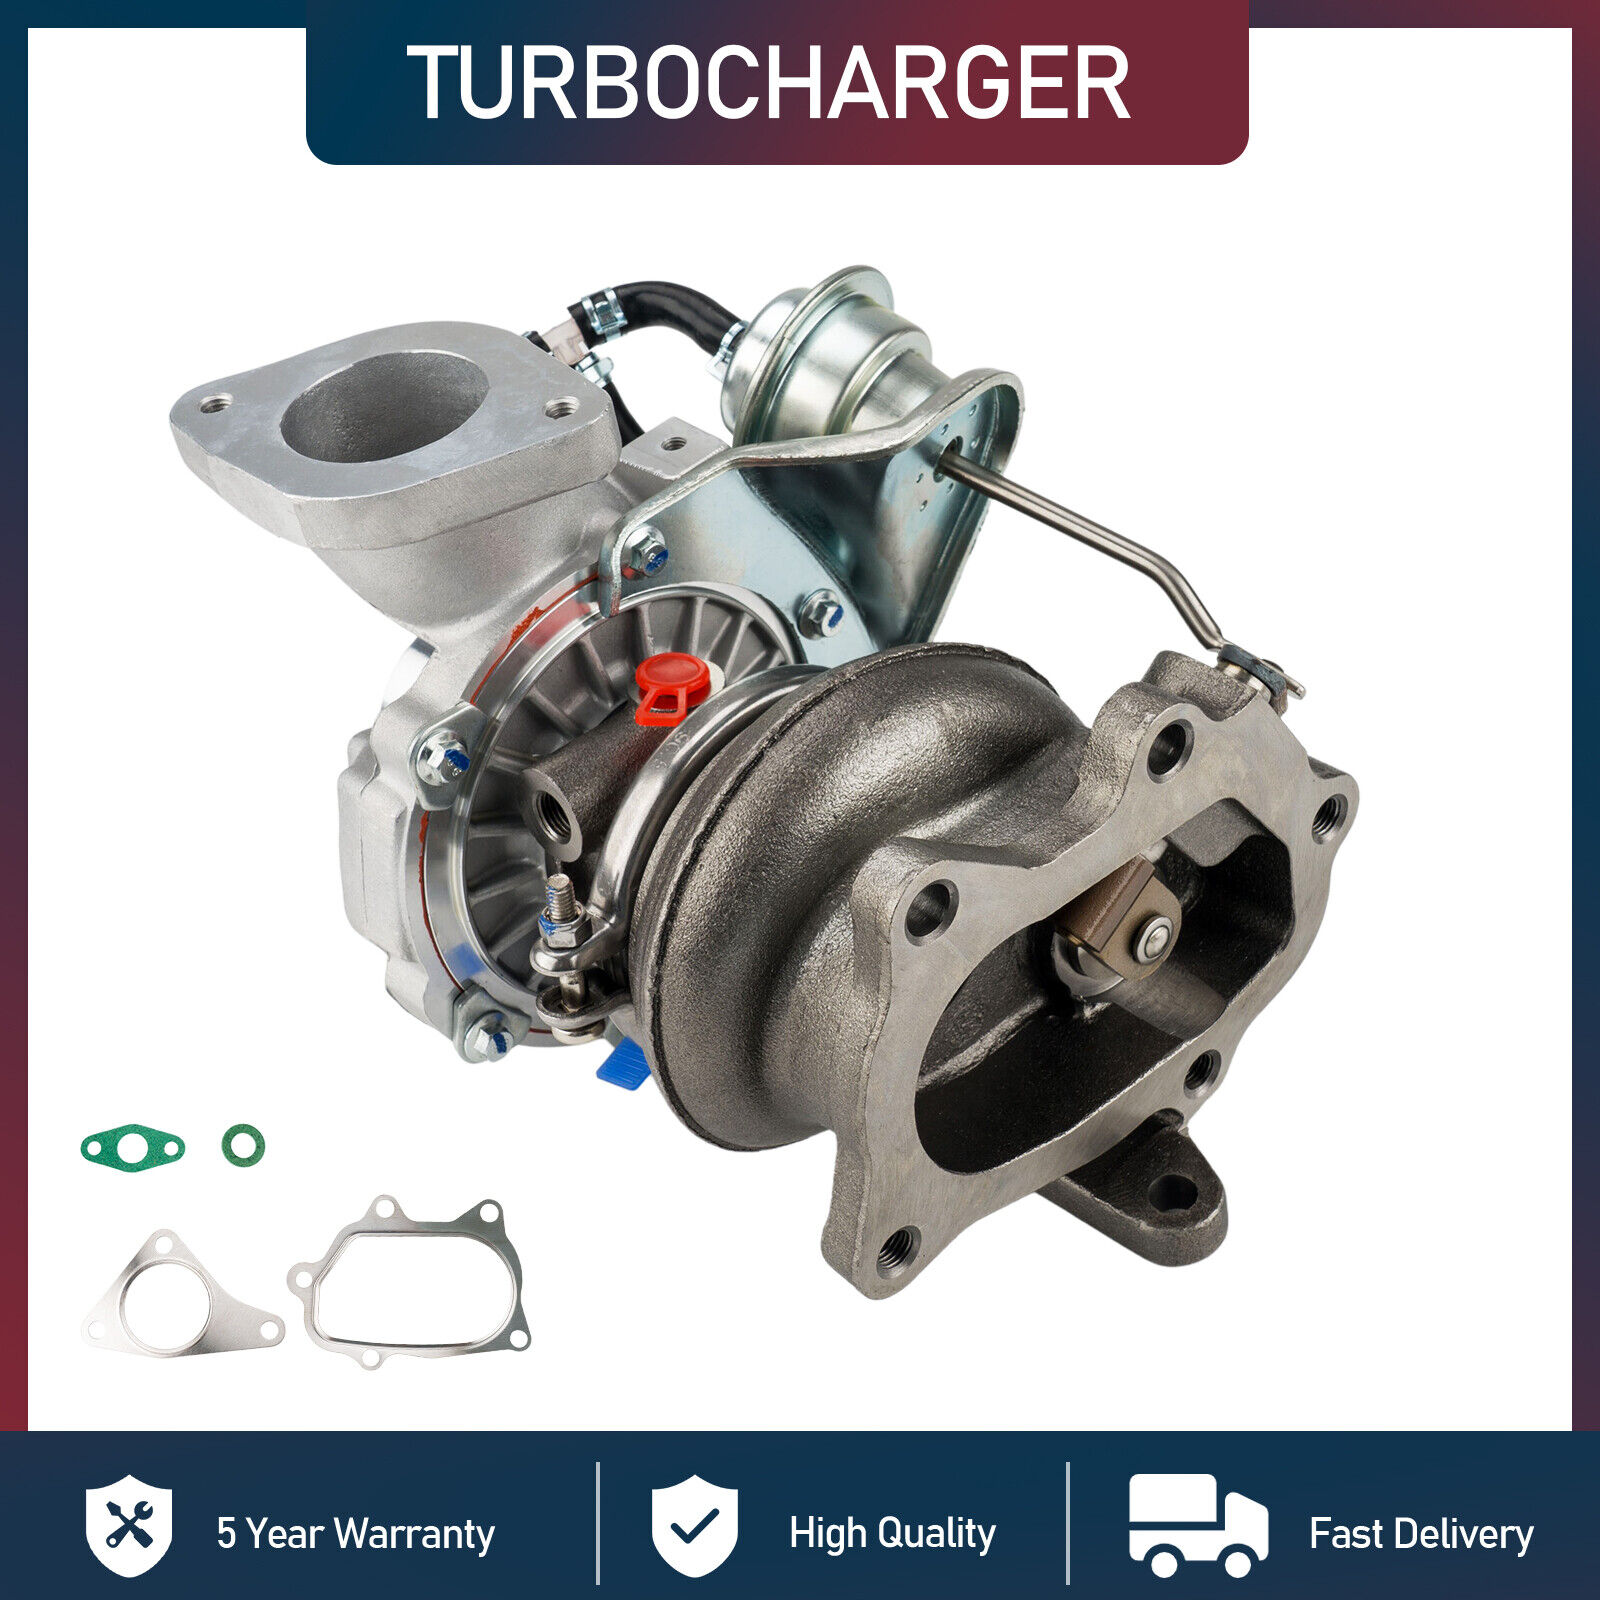 VF40 Turbo Charger 2005-09 For Subaru Legacy GT Outback XT 2.5L RHF5H 14411AA511